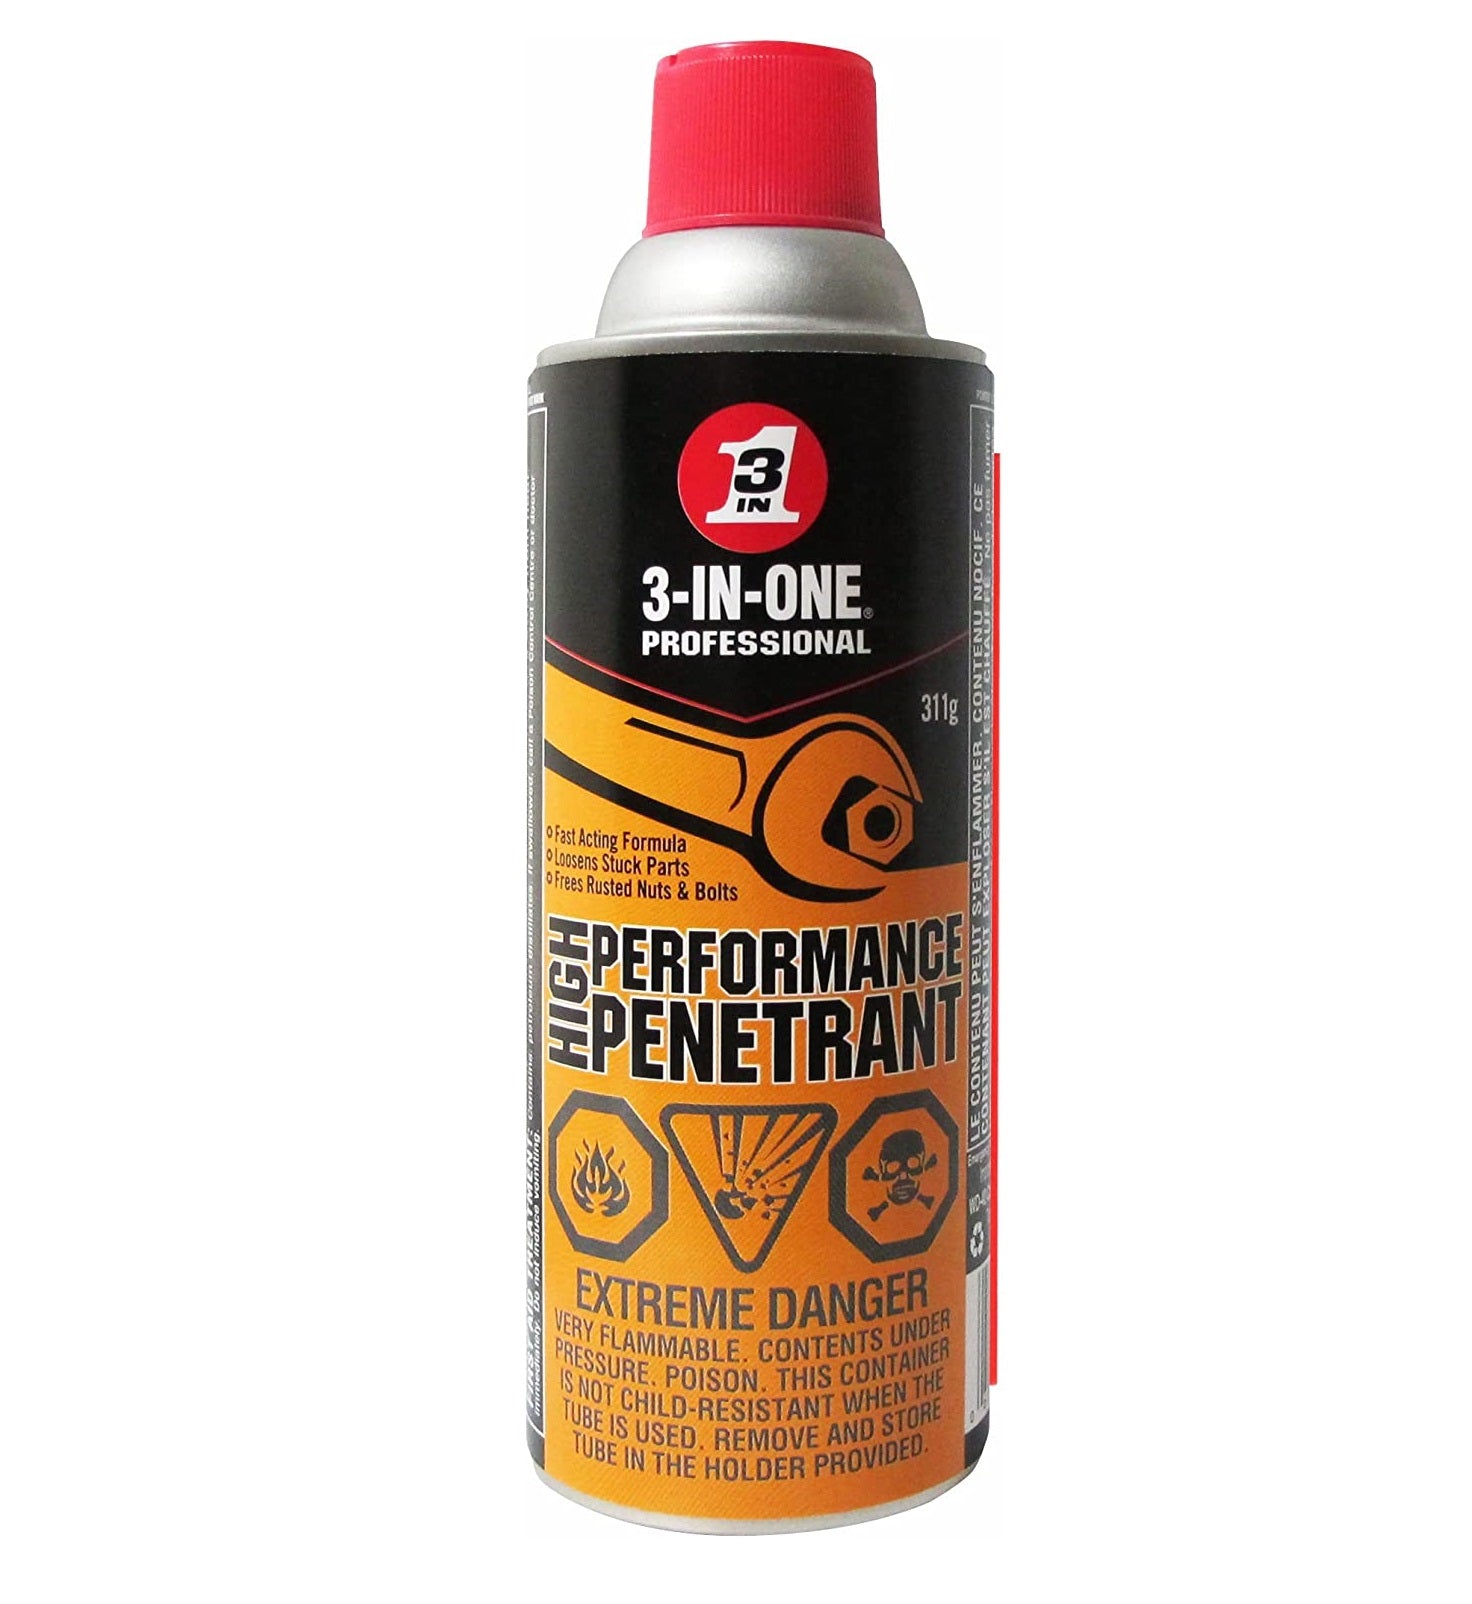 3-in-ONE Professional High Performance Penetrant - 311g Aerosol Can